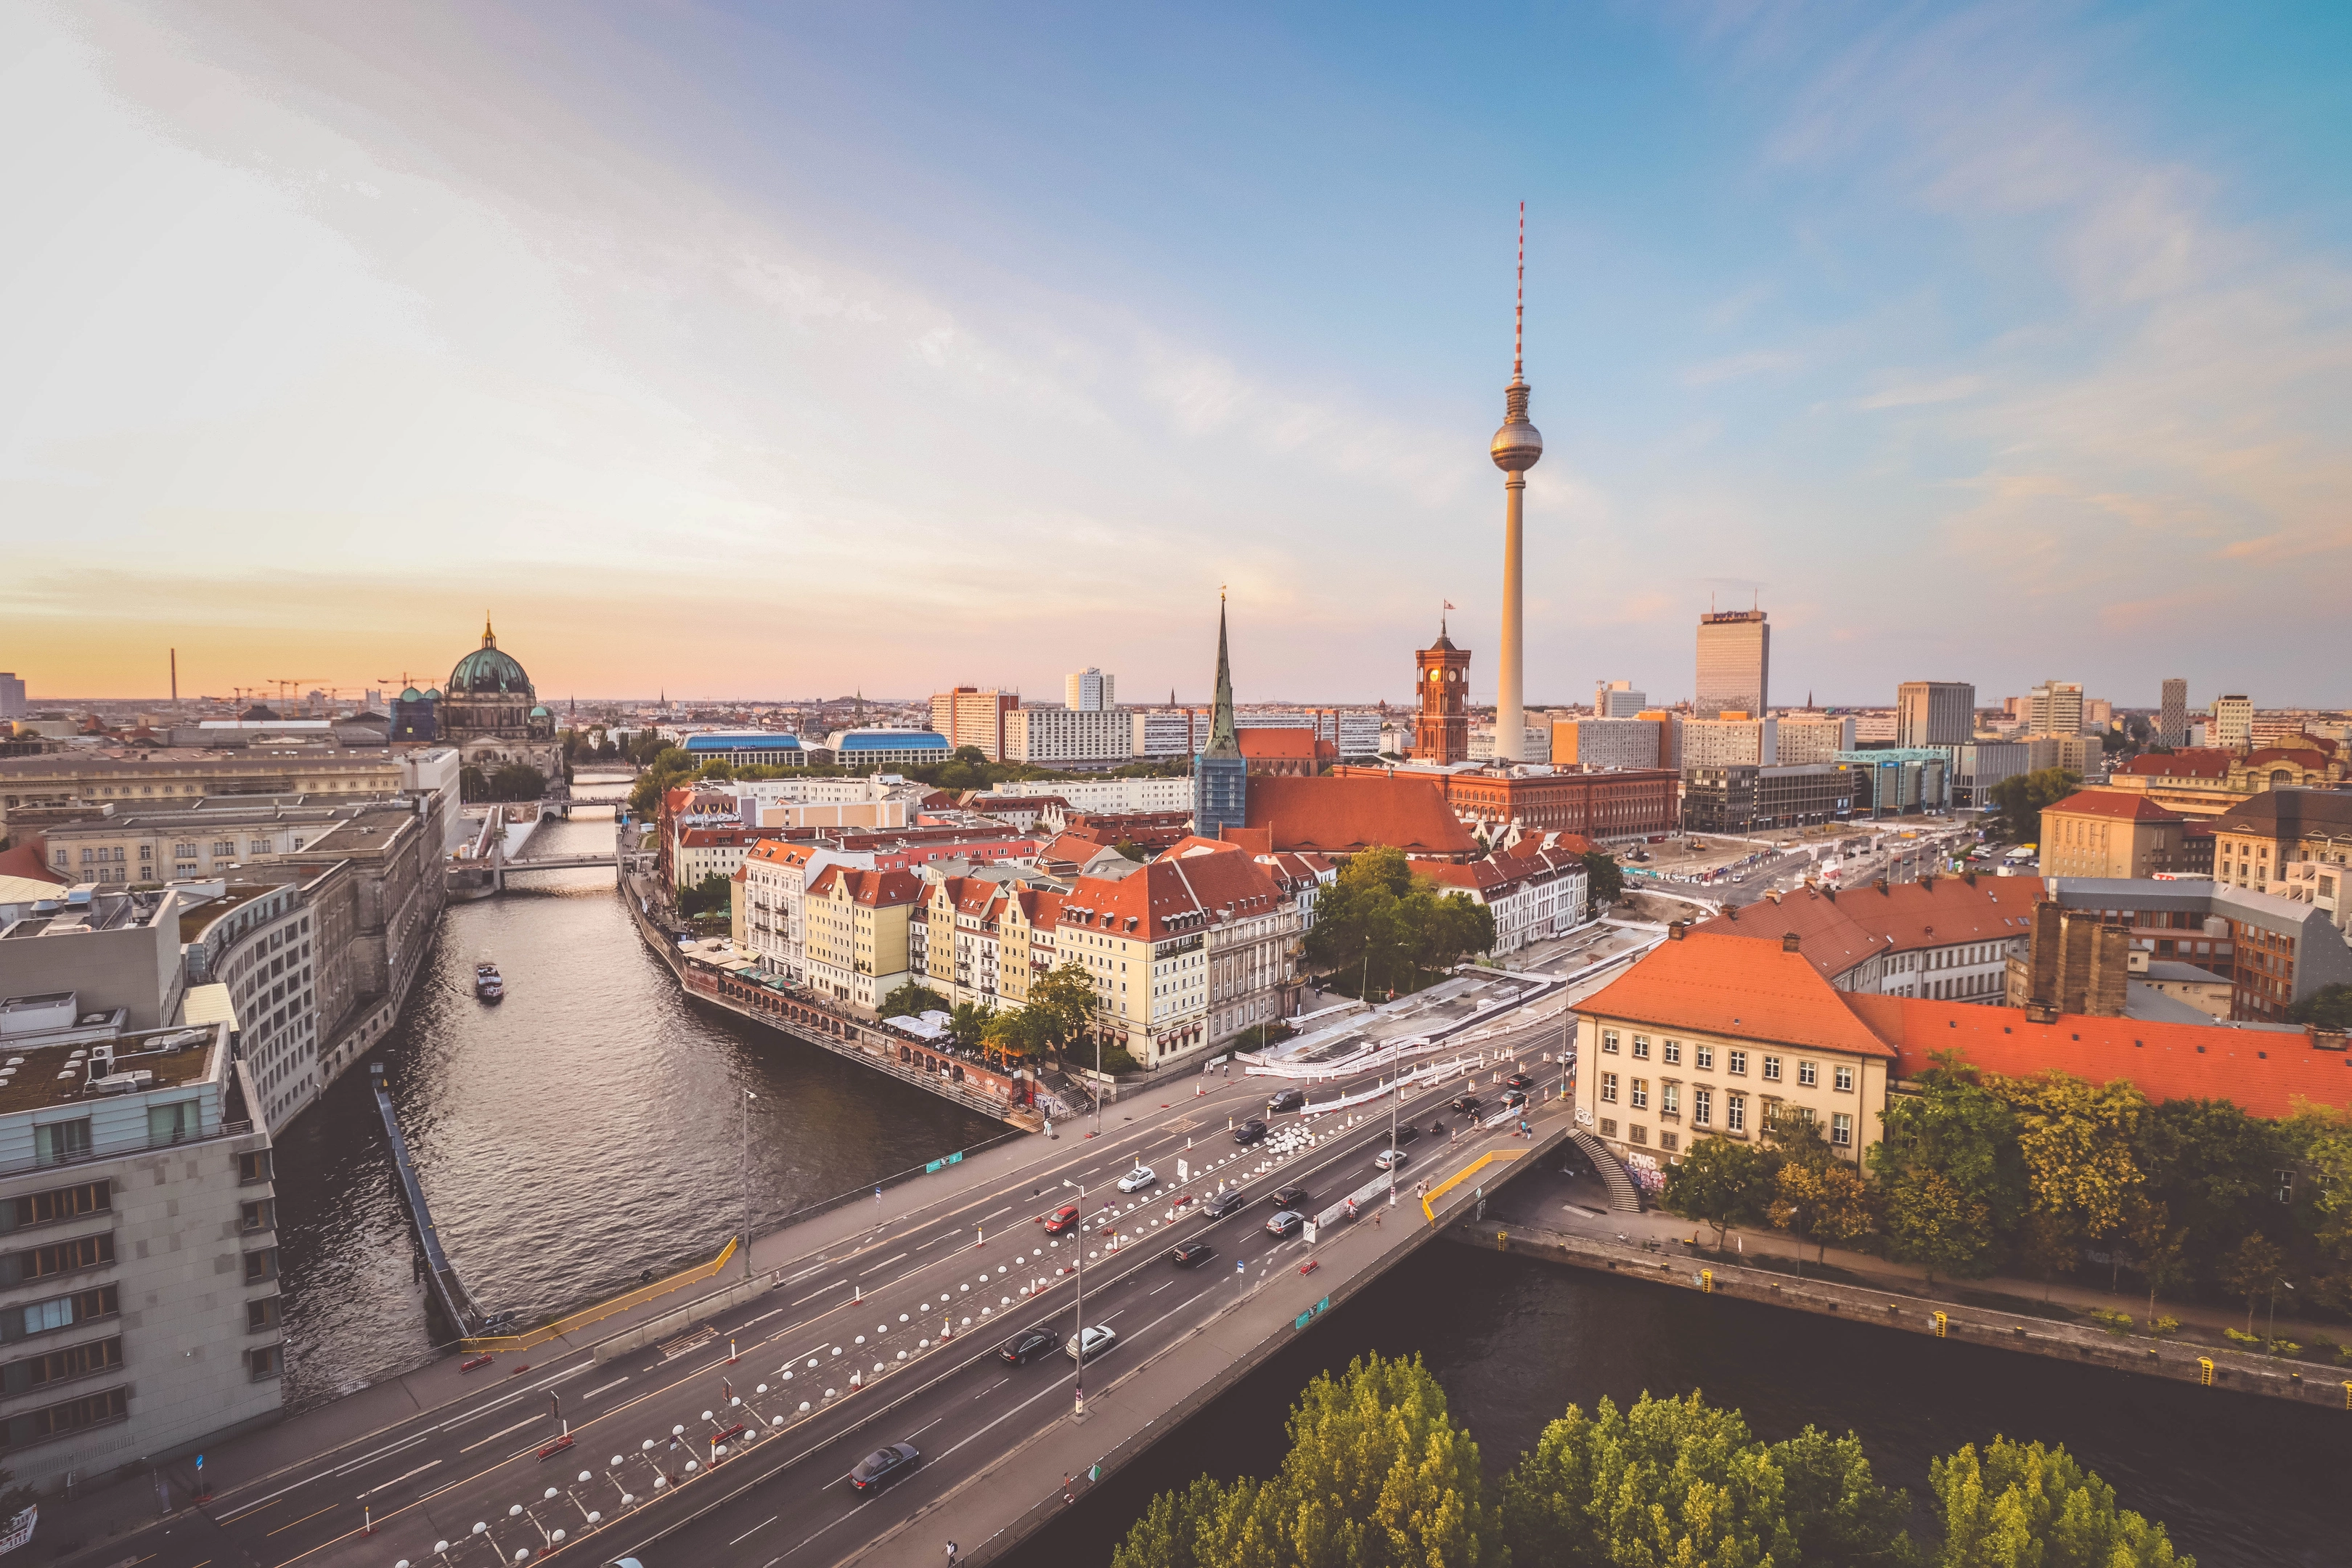 Capture your memories with a photoshoot in Berlin